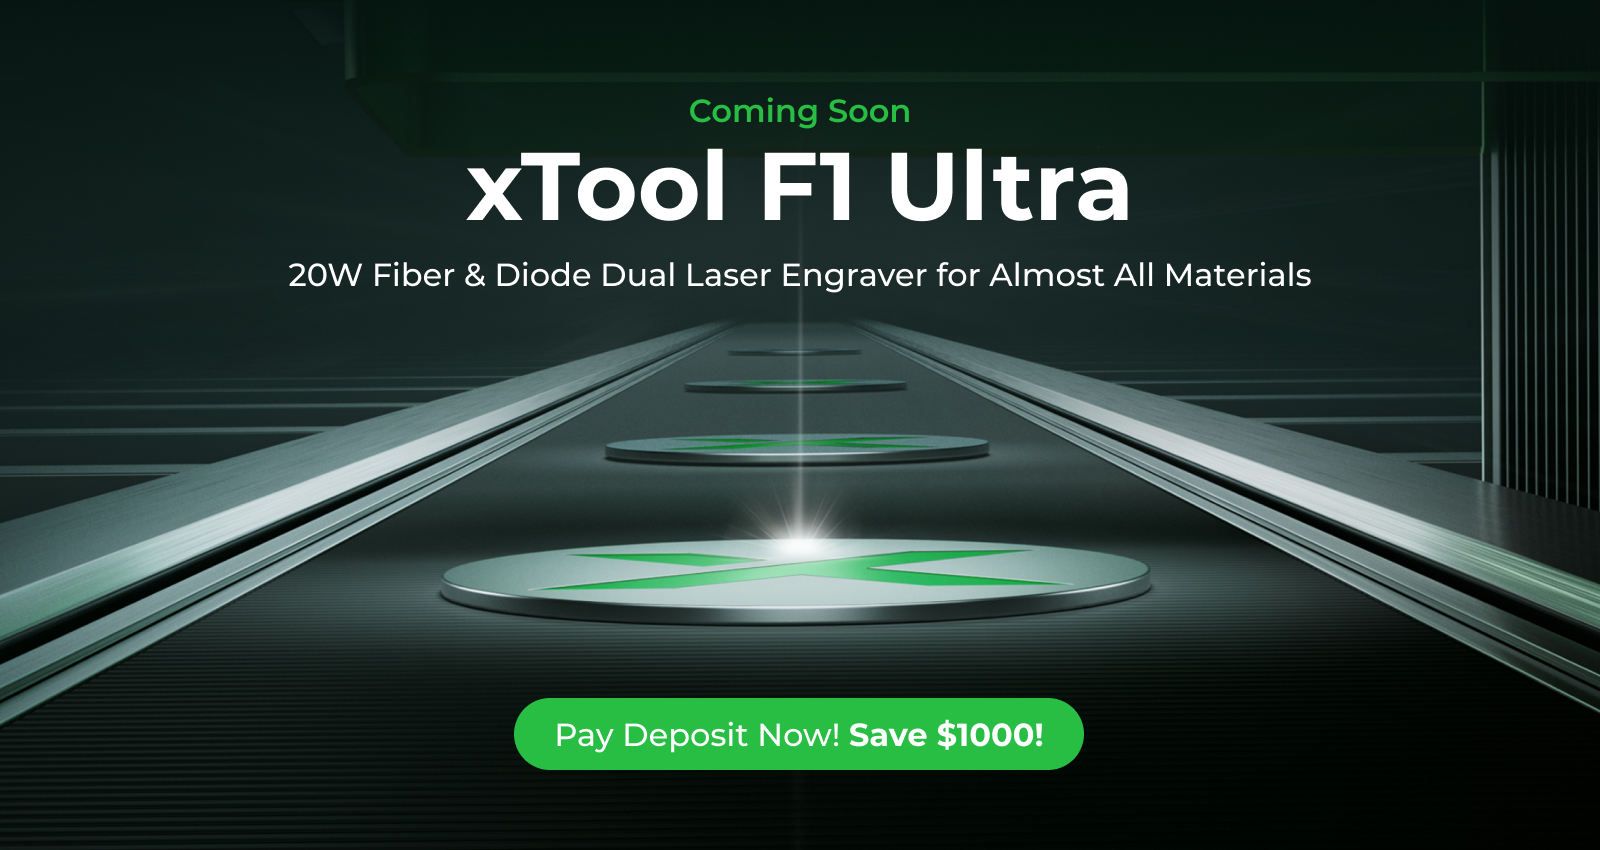 xTool F1 Ultra: 20W Fiber & Diode Dual Laser Engraver for Almost All Materials